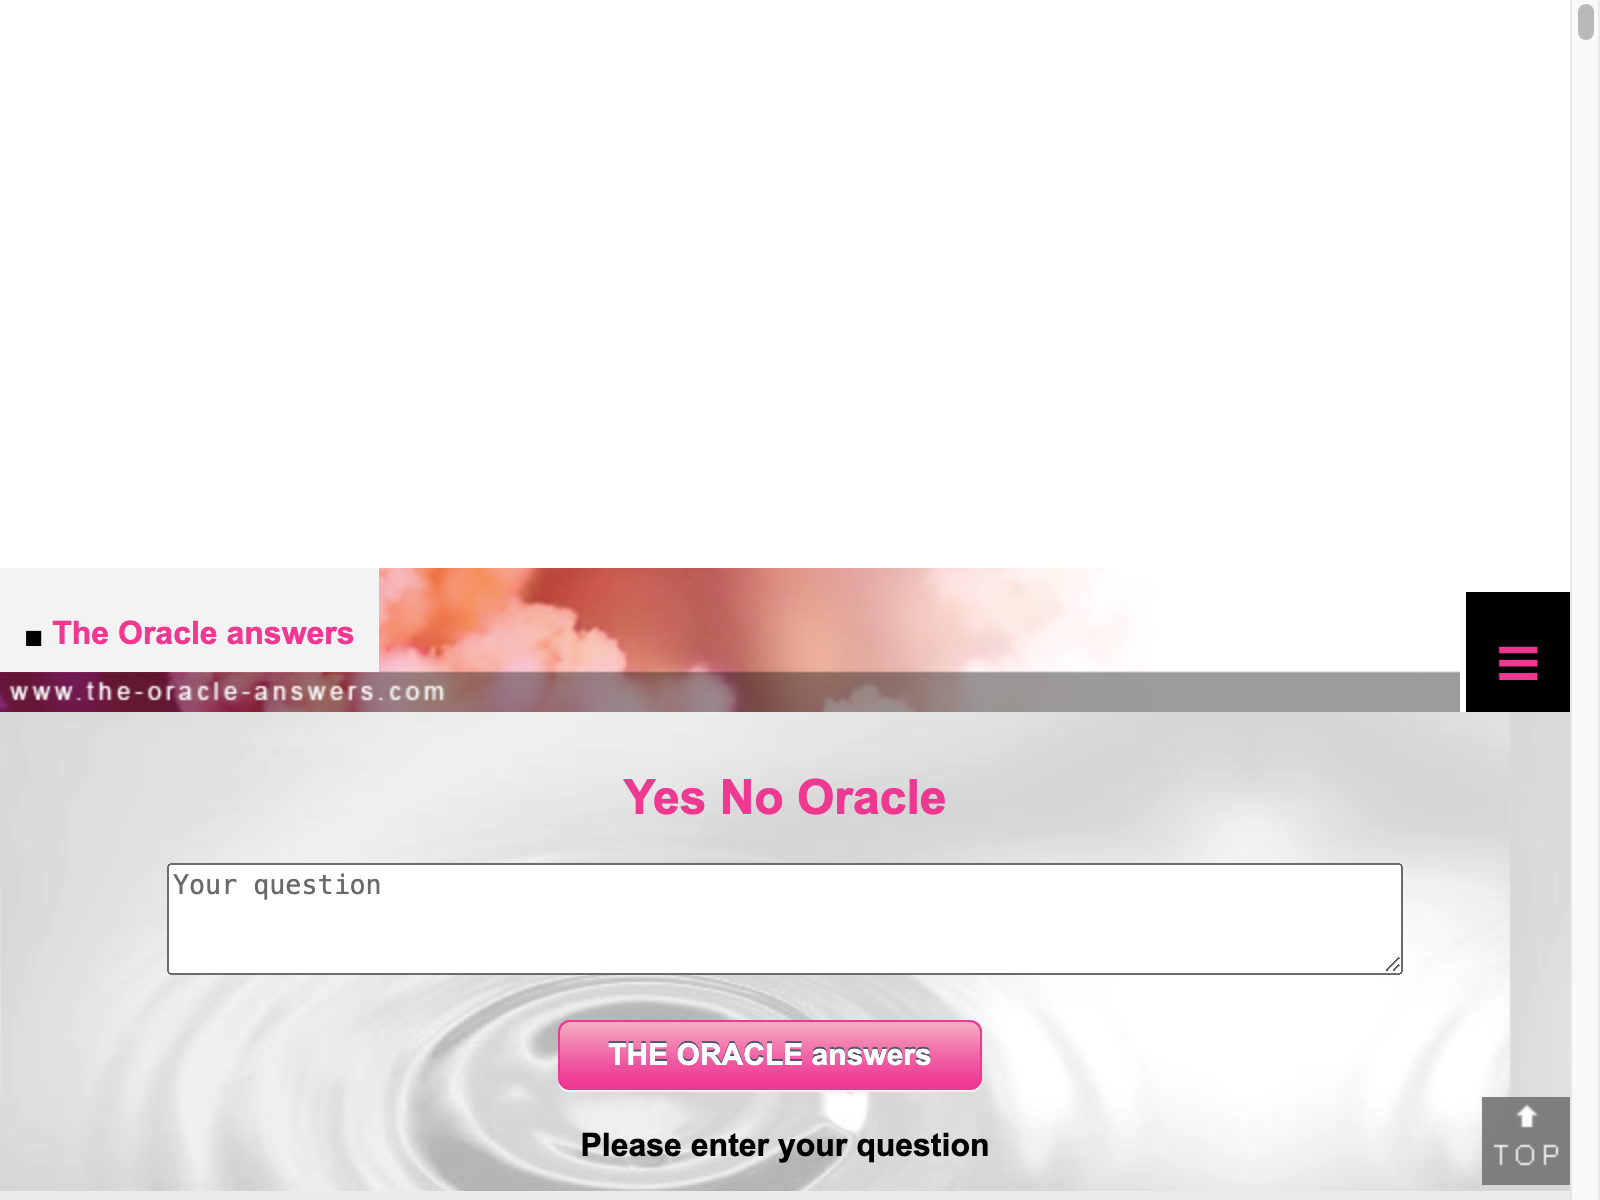 ask the oracle Review: Pros, Cons, Alternatives